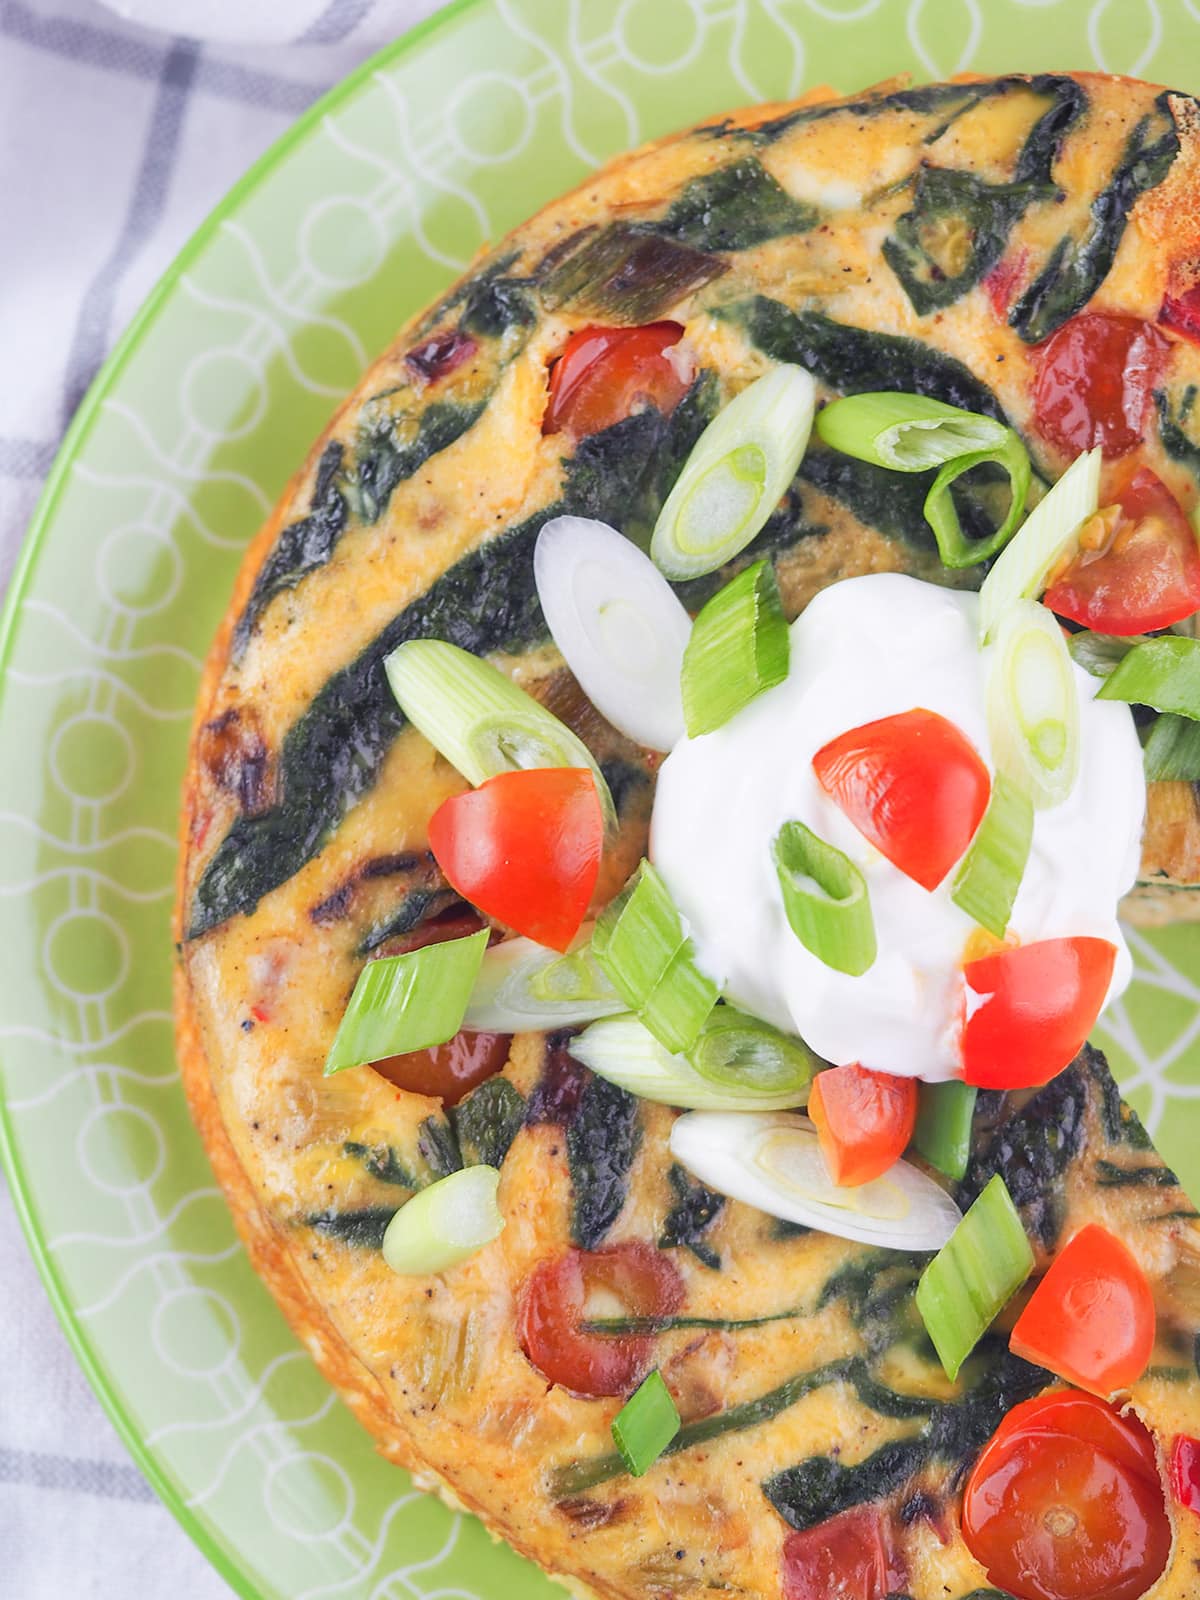 whole frittata on green plate topped with green onoins, tomatoes, and sour cream